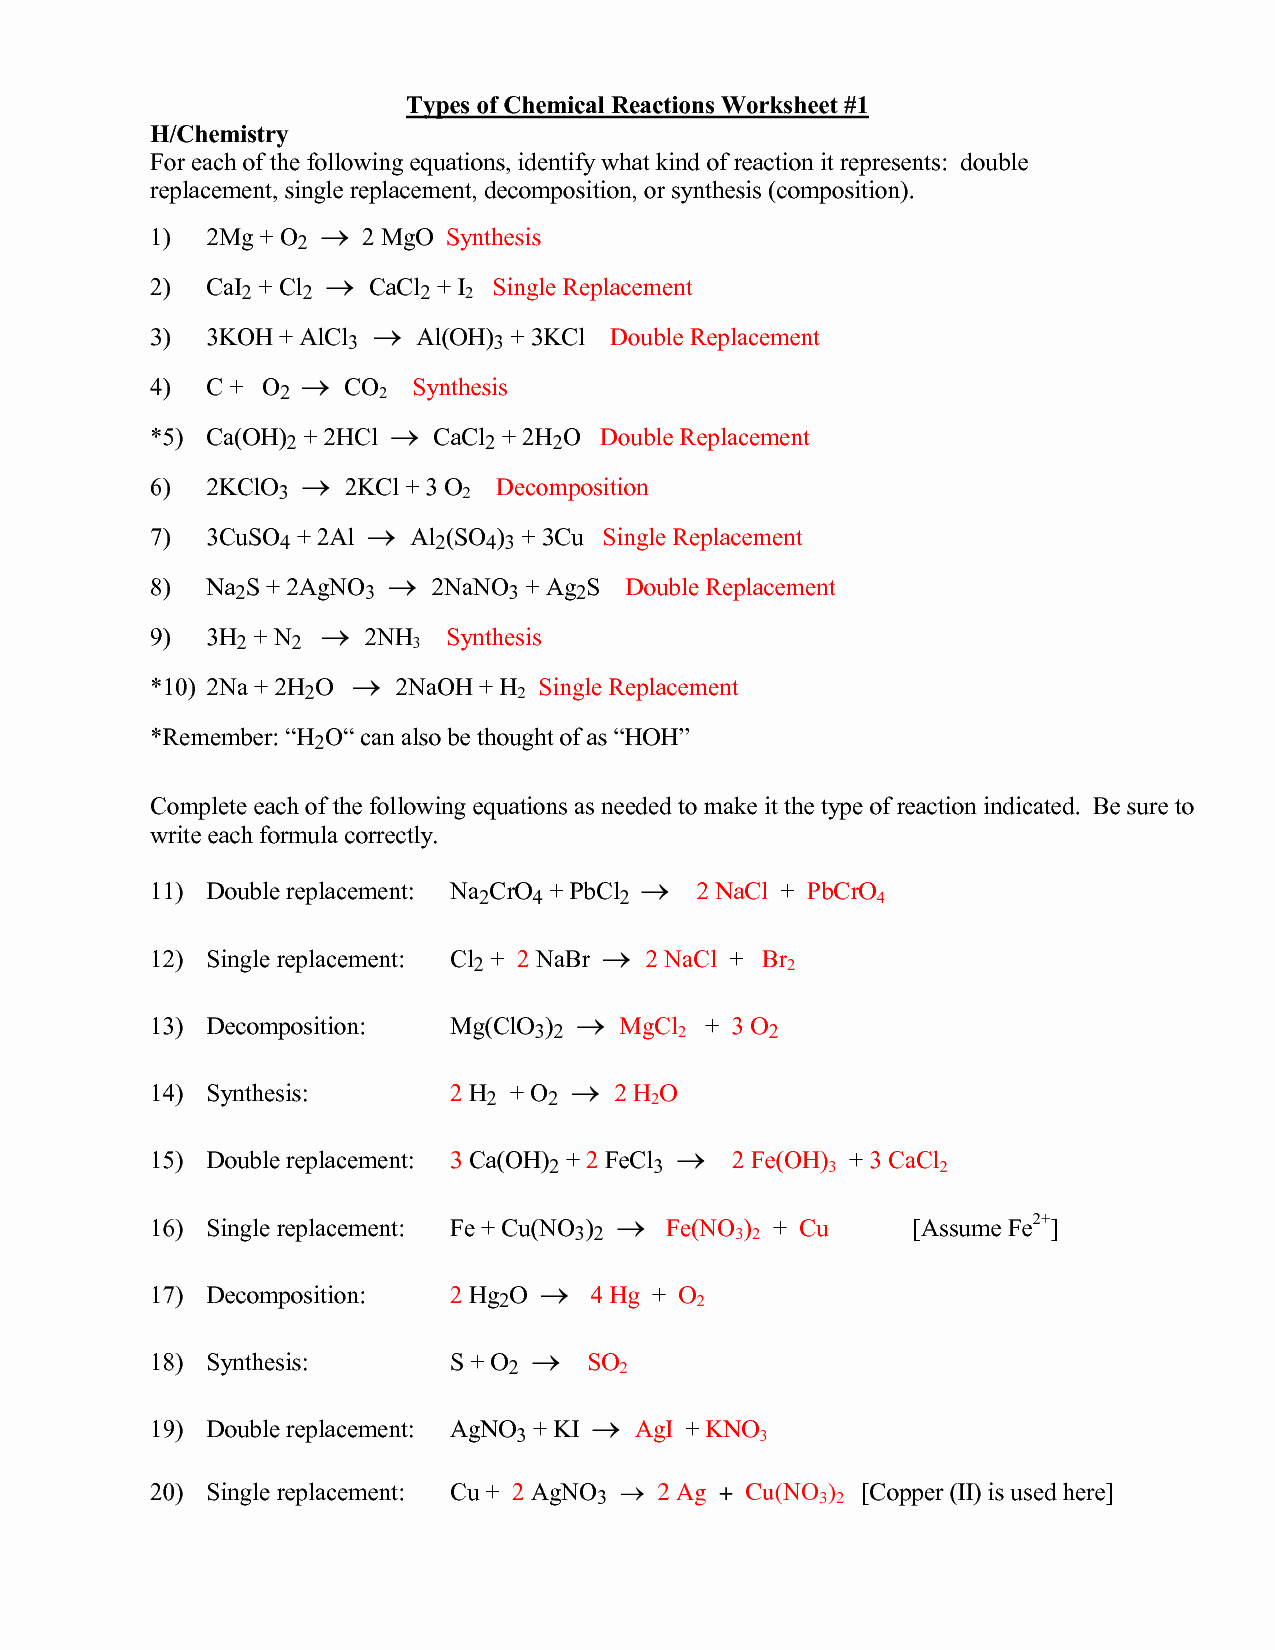 Double Replacement Reaction Worksheet Unique 16 Best Of Types Chemical Reactions Worksheets